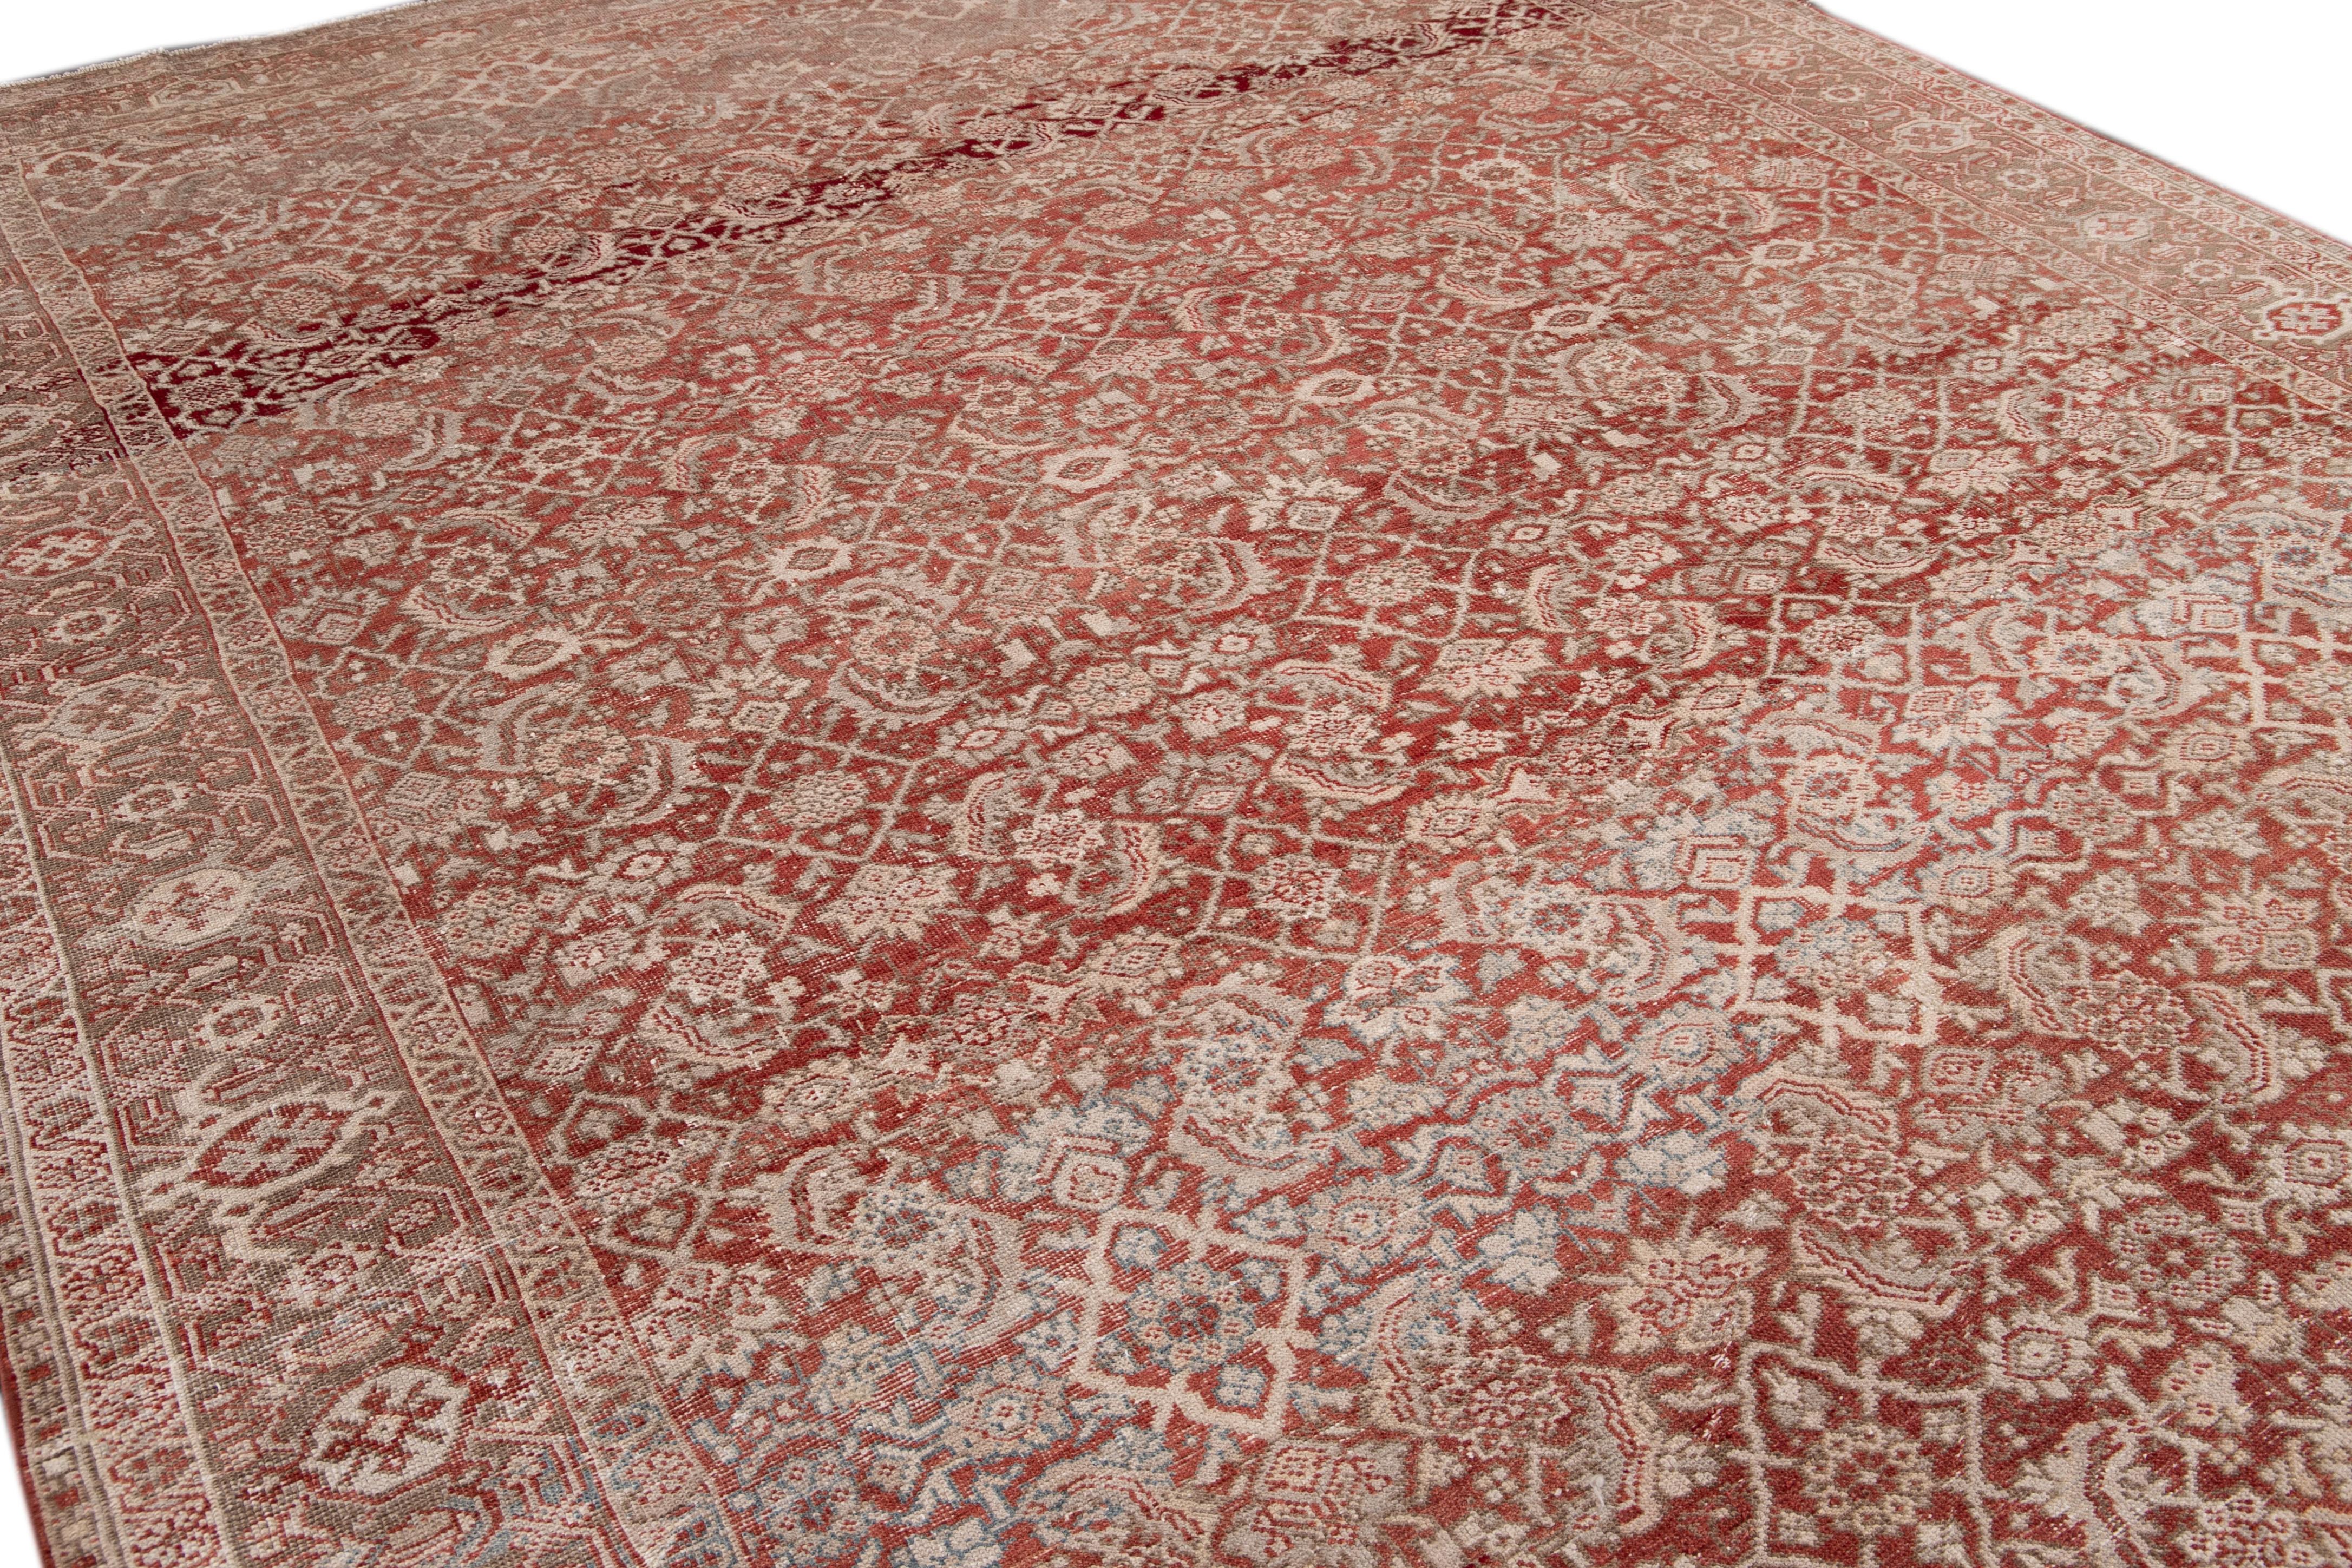 Antique Mahal Red Handmade Wool Rug In Good Condition For Sale In Norwalk, CT